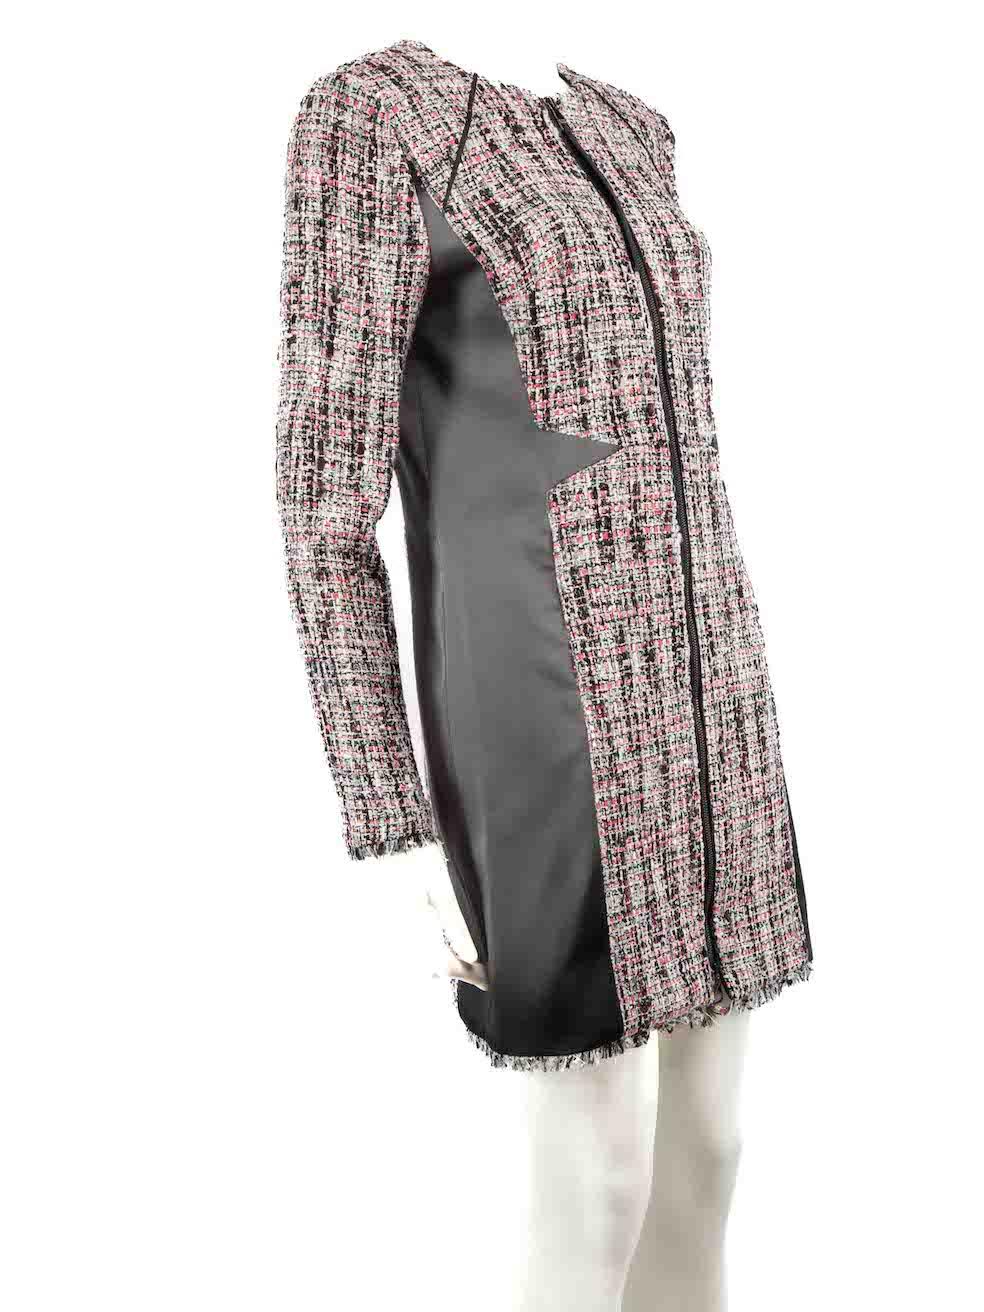 CONDITION is Never worn, with tags. No visible wear to jacket is evident on this new Karl Lagerfeld designer resale item.
 
 Details
 Multicolour- pink and black
 Synthetic
 Coat
 Tweed bouclé
 Round neck
 Long sleeves
 Zip fastening
 Black satin